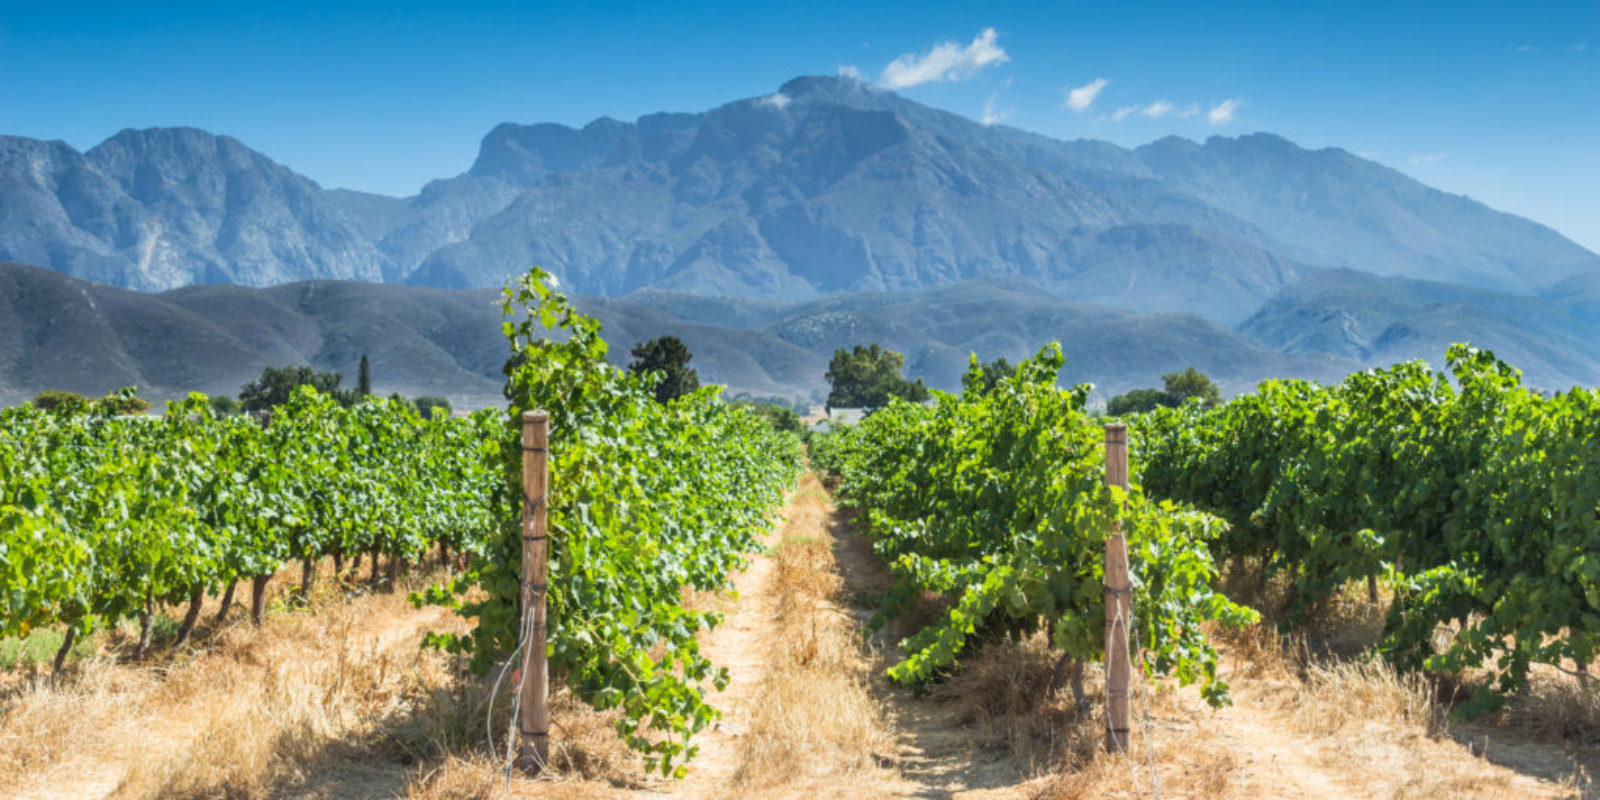 South African wine is among the oldest in the world, but only known on the international stage for about twenty years. Today, luxury travel to this remote region is high on food and wine lovers lists.